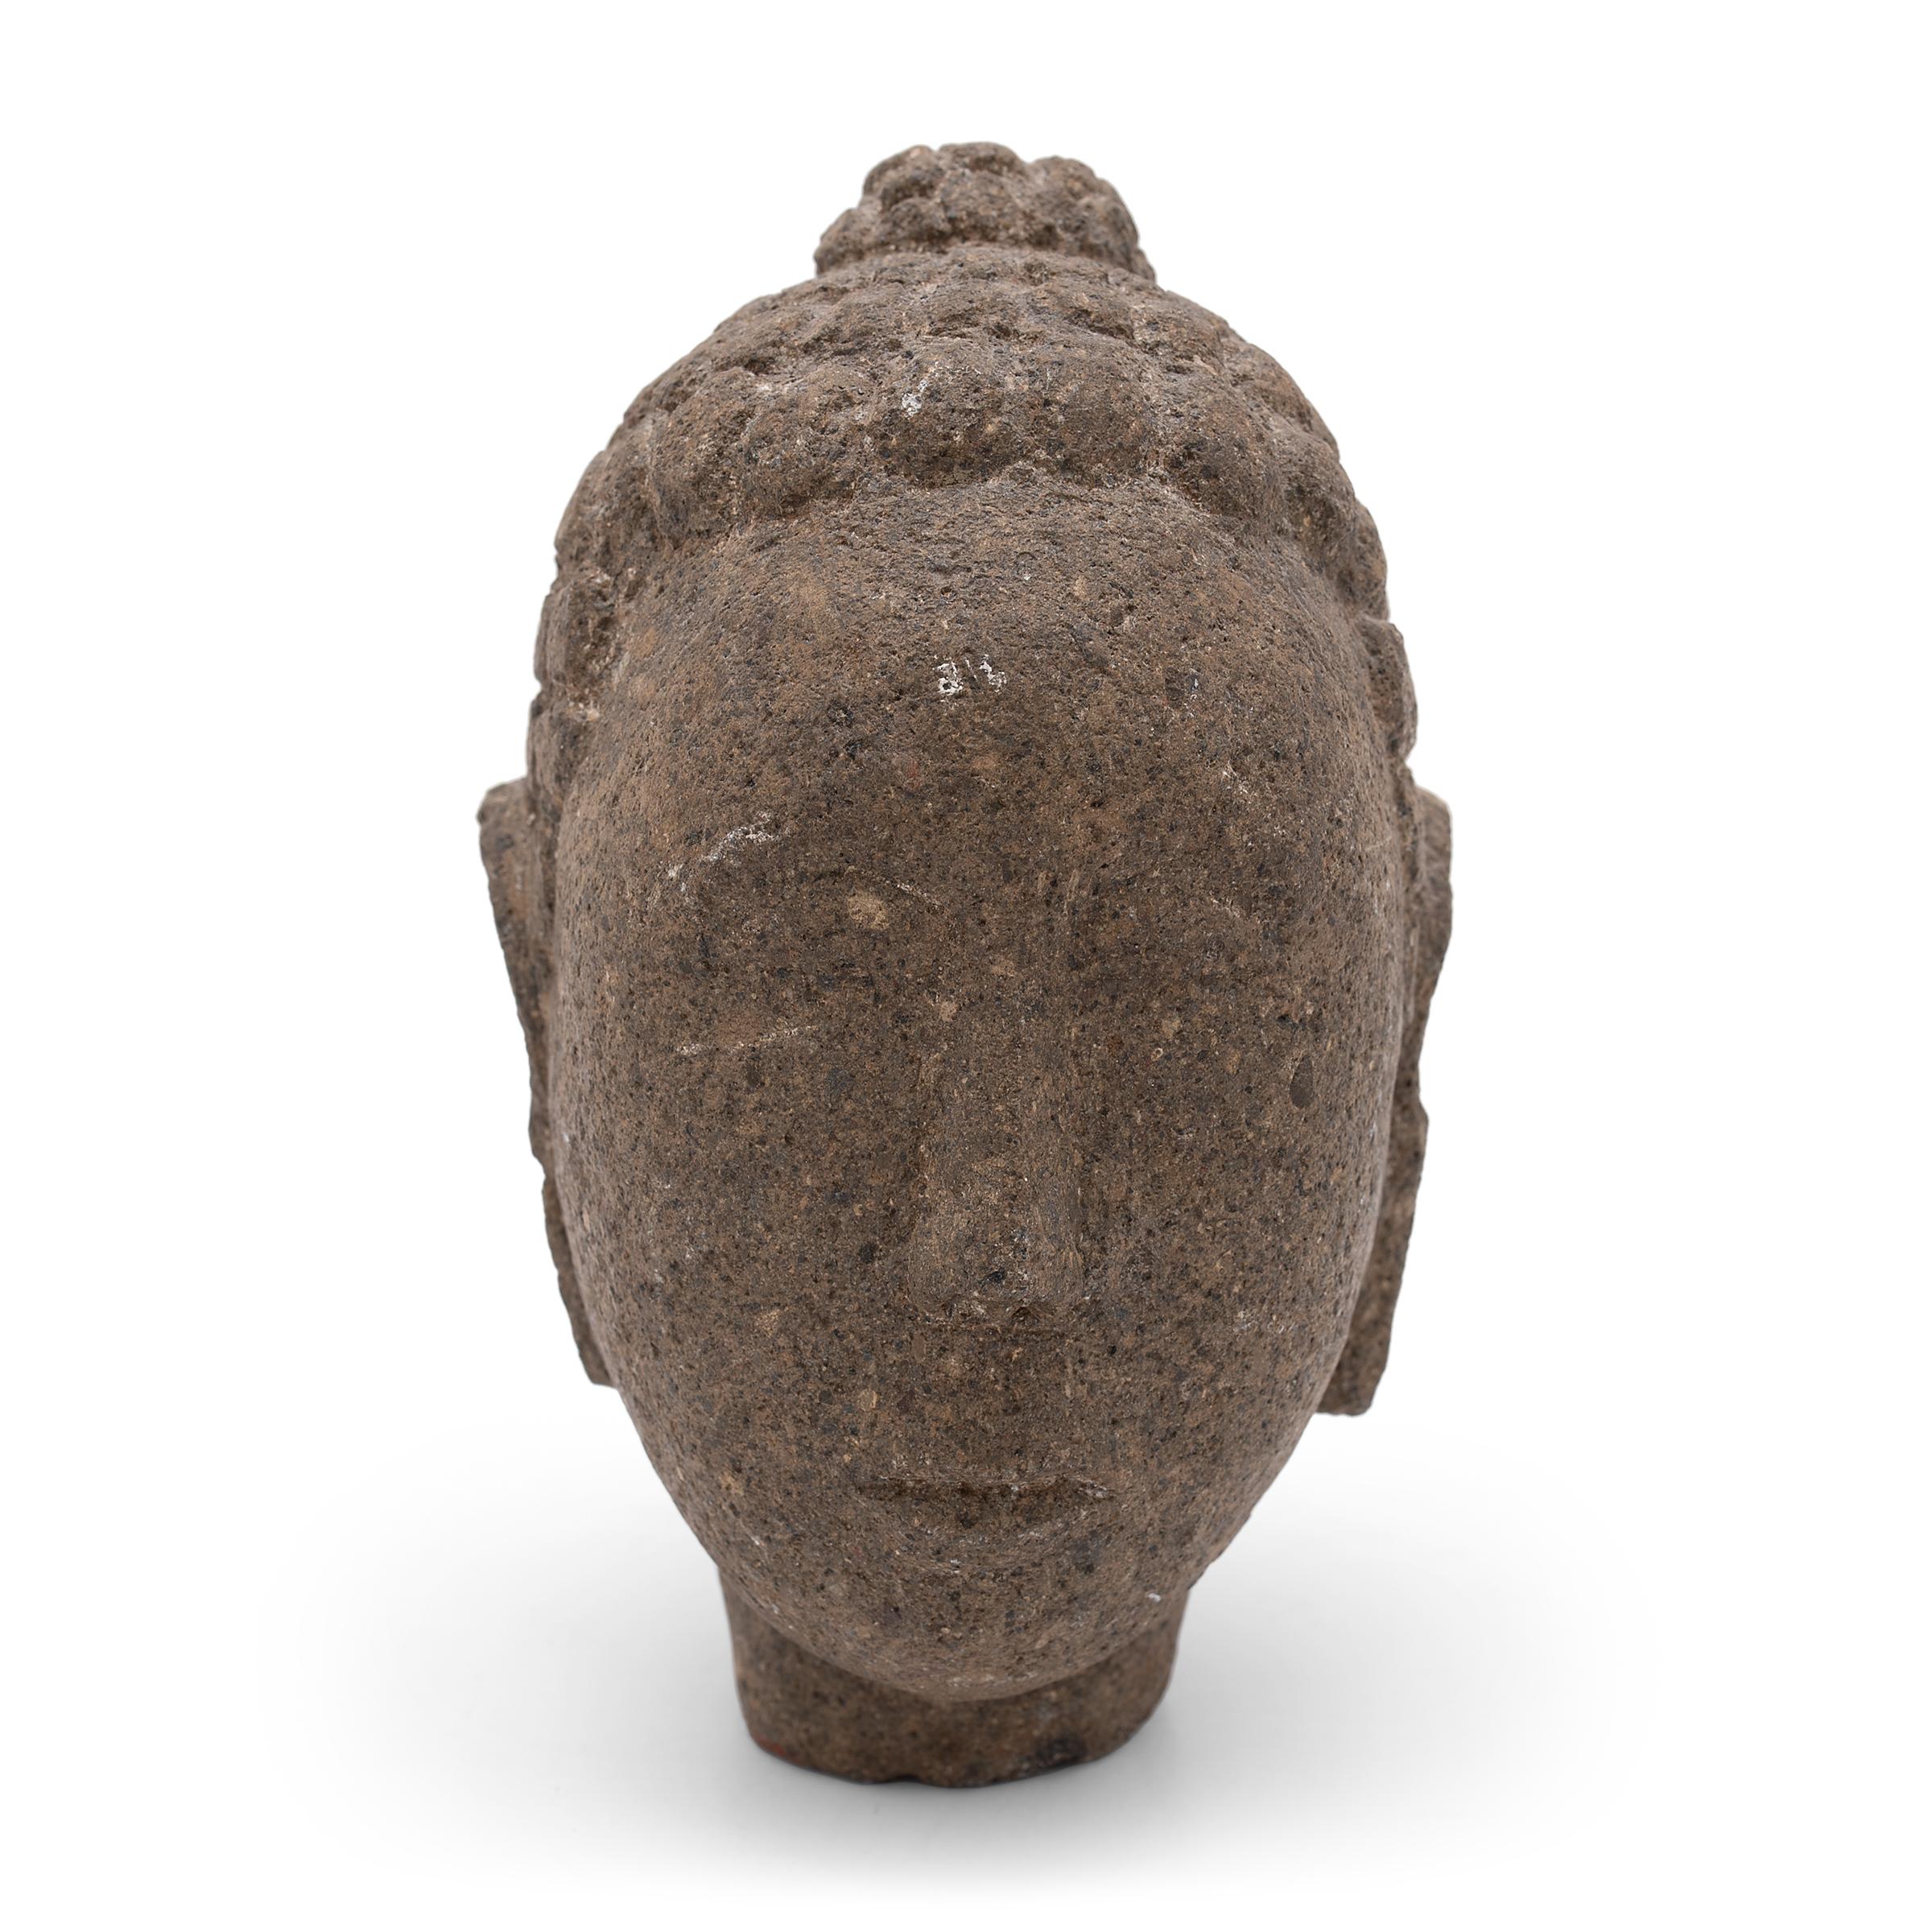 With closed eyes and a gentle expression, this petite stone Buddha head brings calm and serenity to its surroundings. The hand-carved figure depicts the historic Buddha Shakyamuni, also known as Shaka, Gautama Buddha, or Prince Siddhartha. Commonly